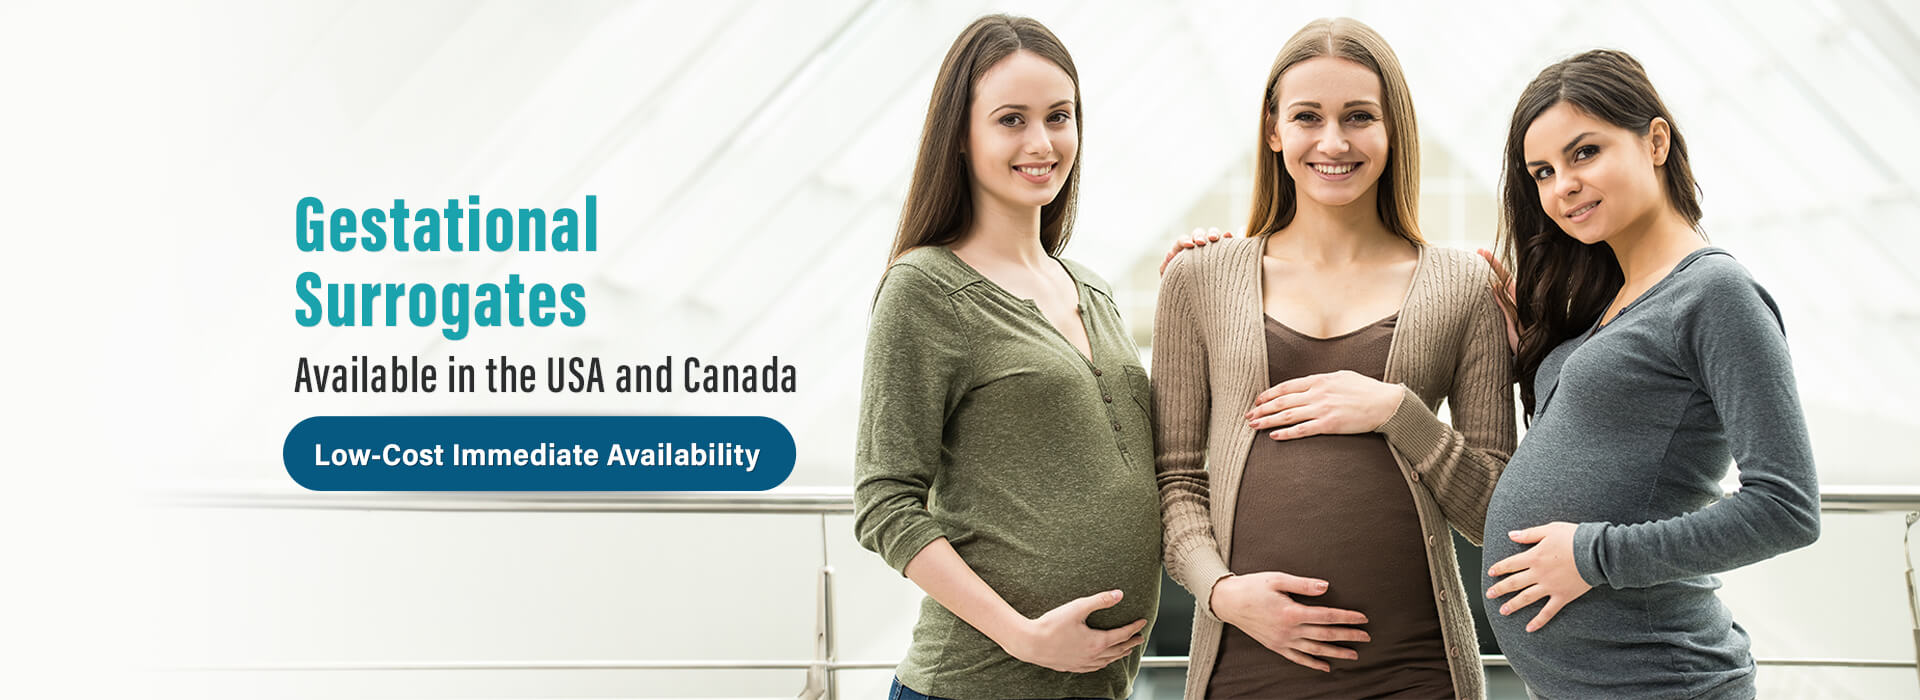 Gestational Surrogates Available in the USA